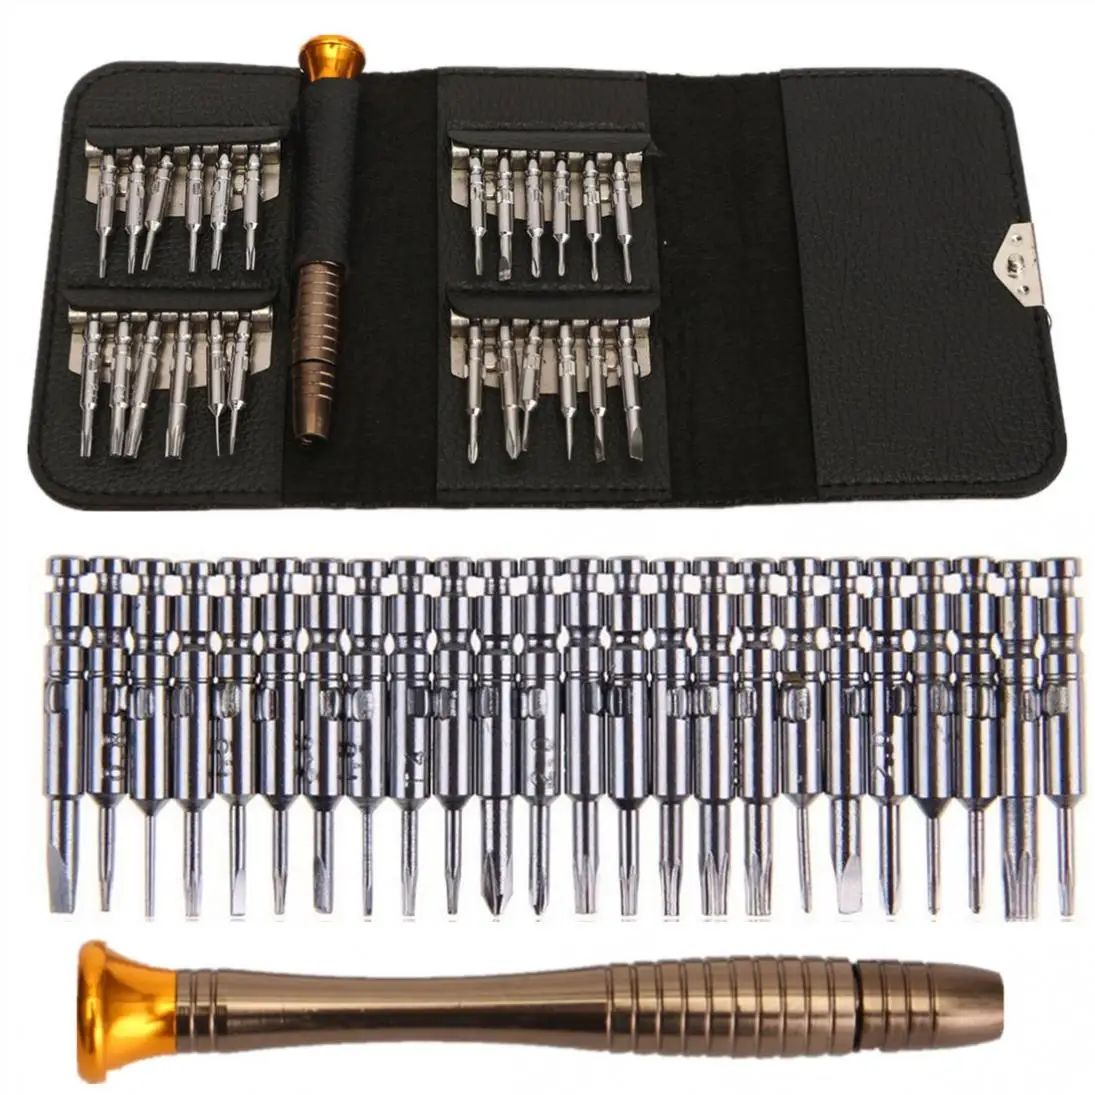 

25 in 1 Precision Torx Screwdriver Cell Phone Wallet Repair Tool Kit for Mobile Phone Cellphone Electronics Screwdriver Wallet